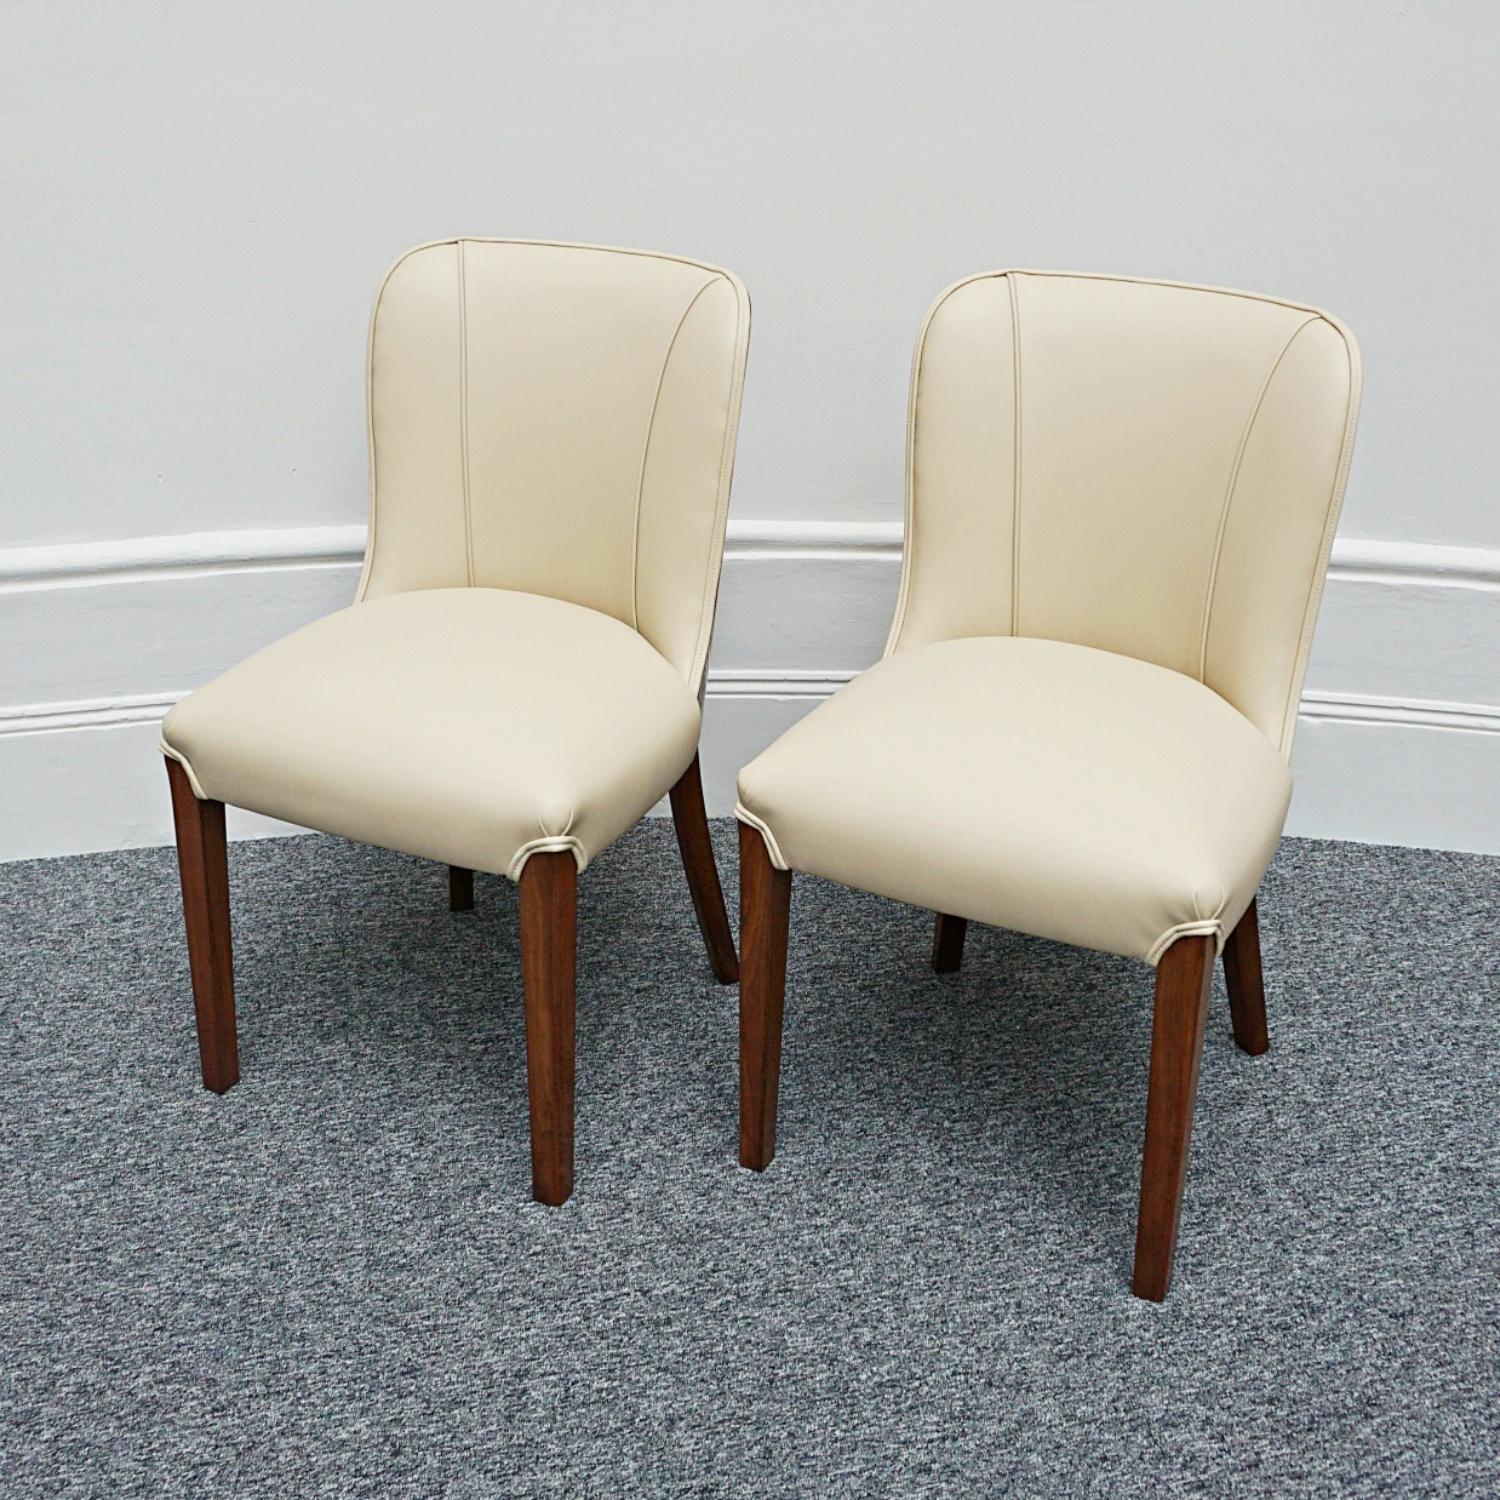 Pair of Art Deco Burr Walnut and Cream Leather Side Chairs circa 1930 2